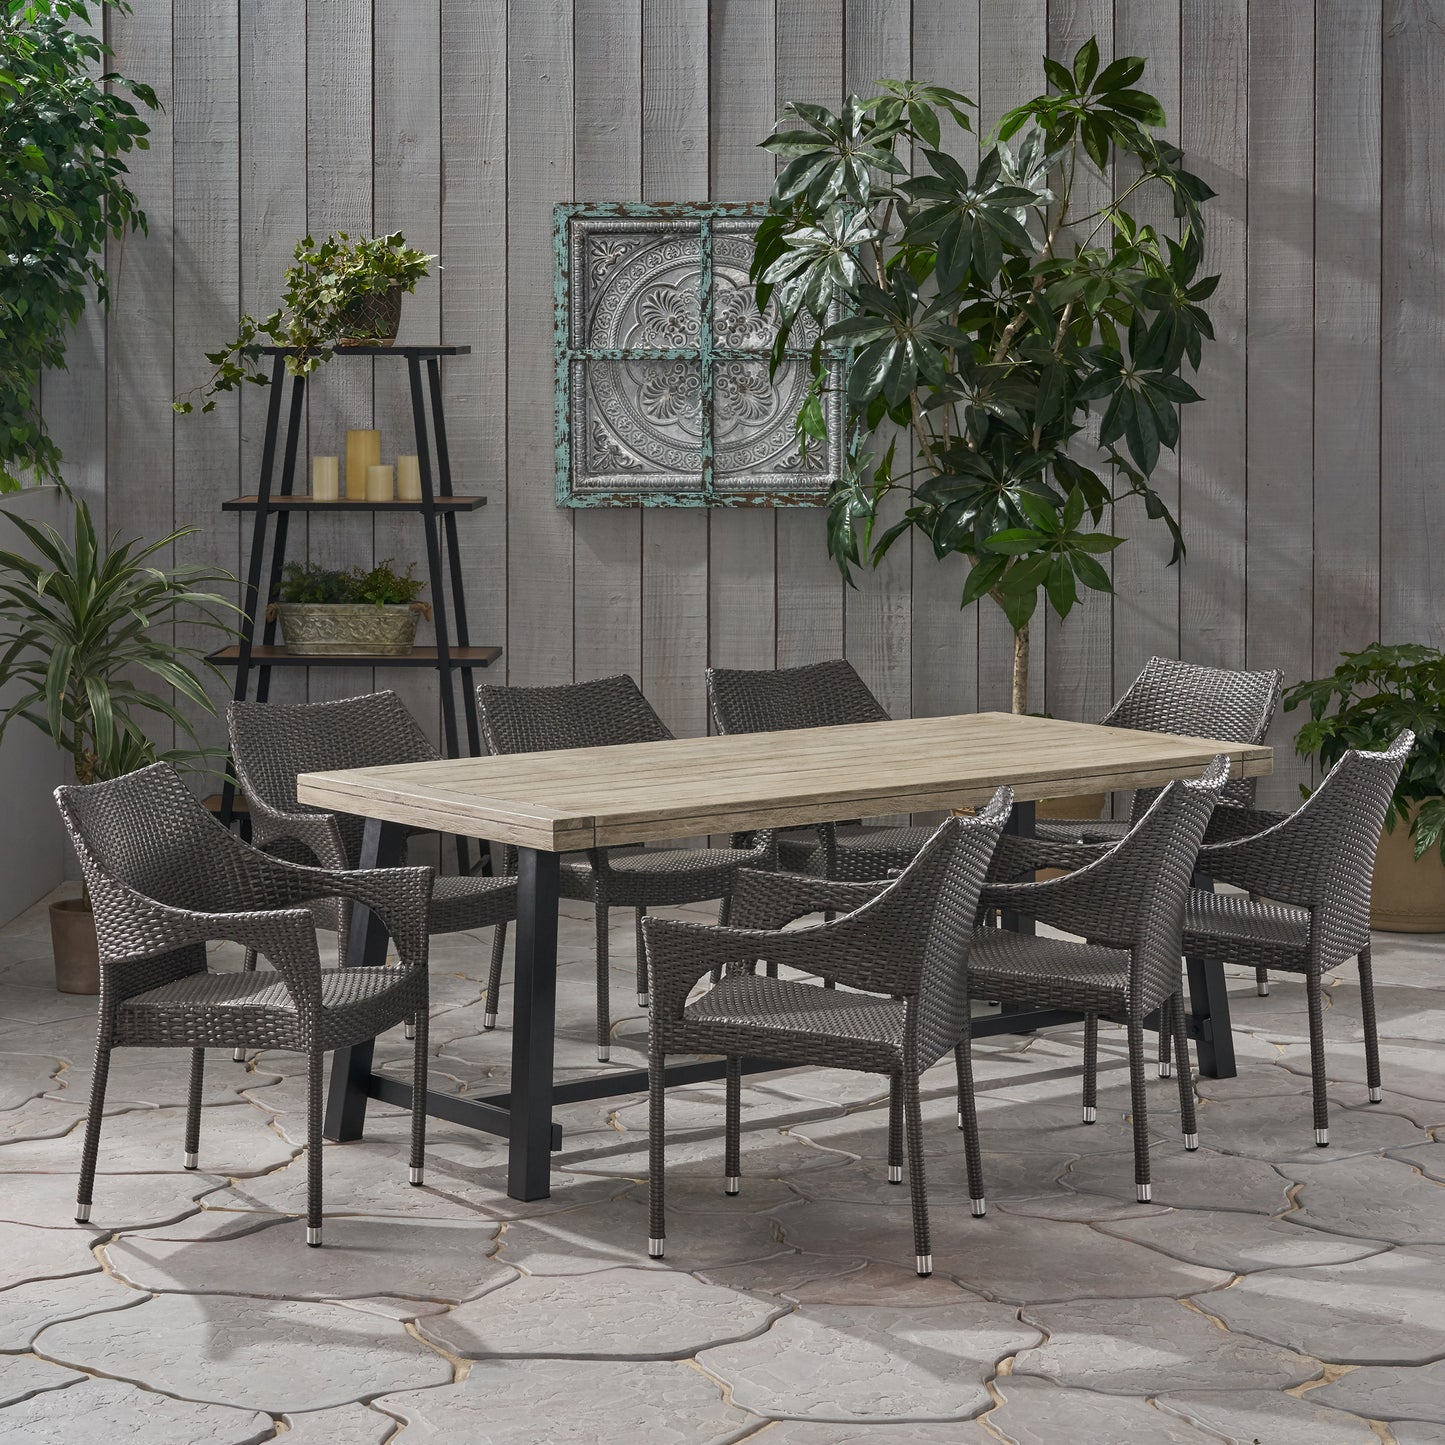 Emmalynn Outdoor Wood and Wicker 8 Seater Dining Set